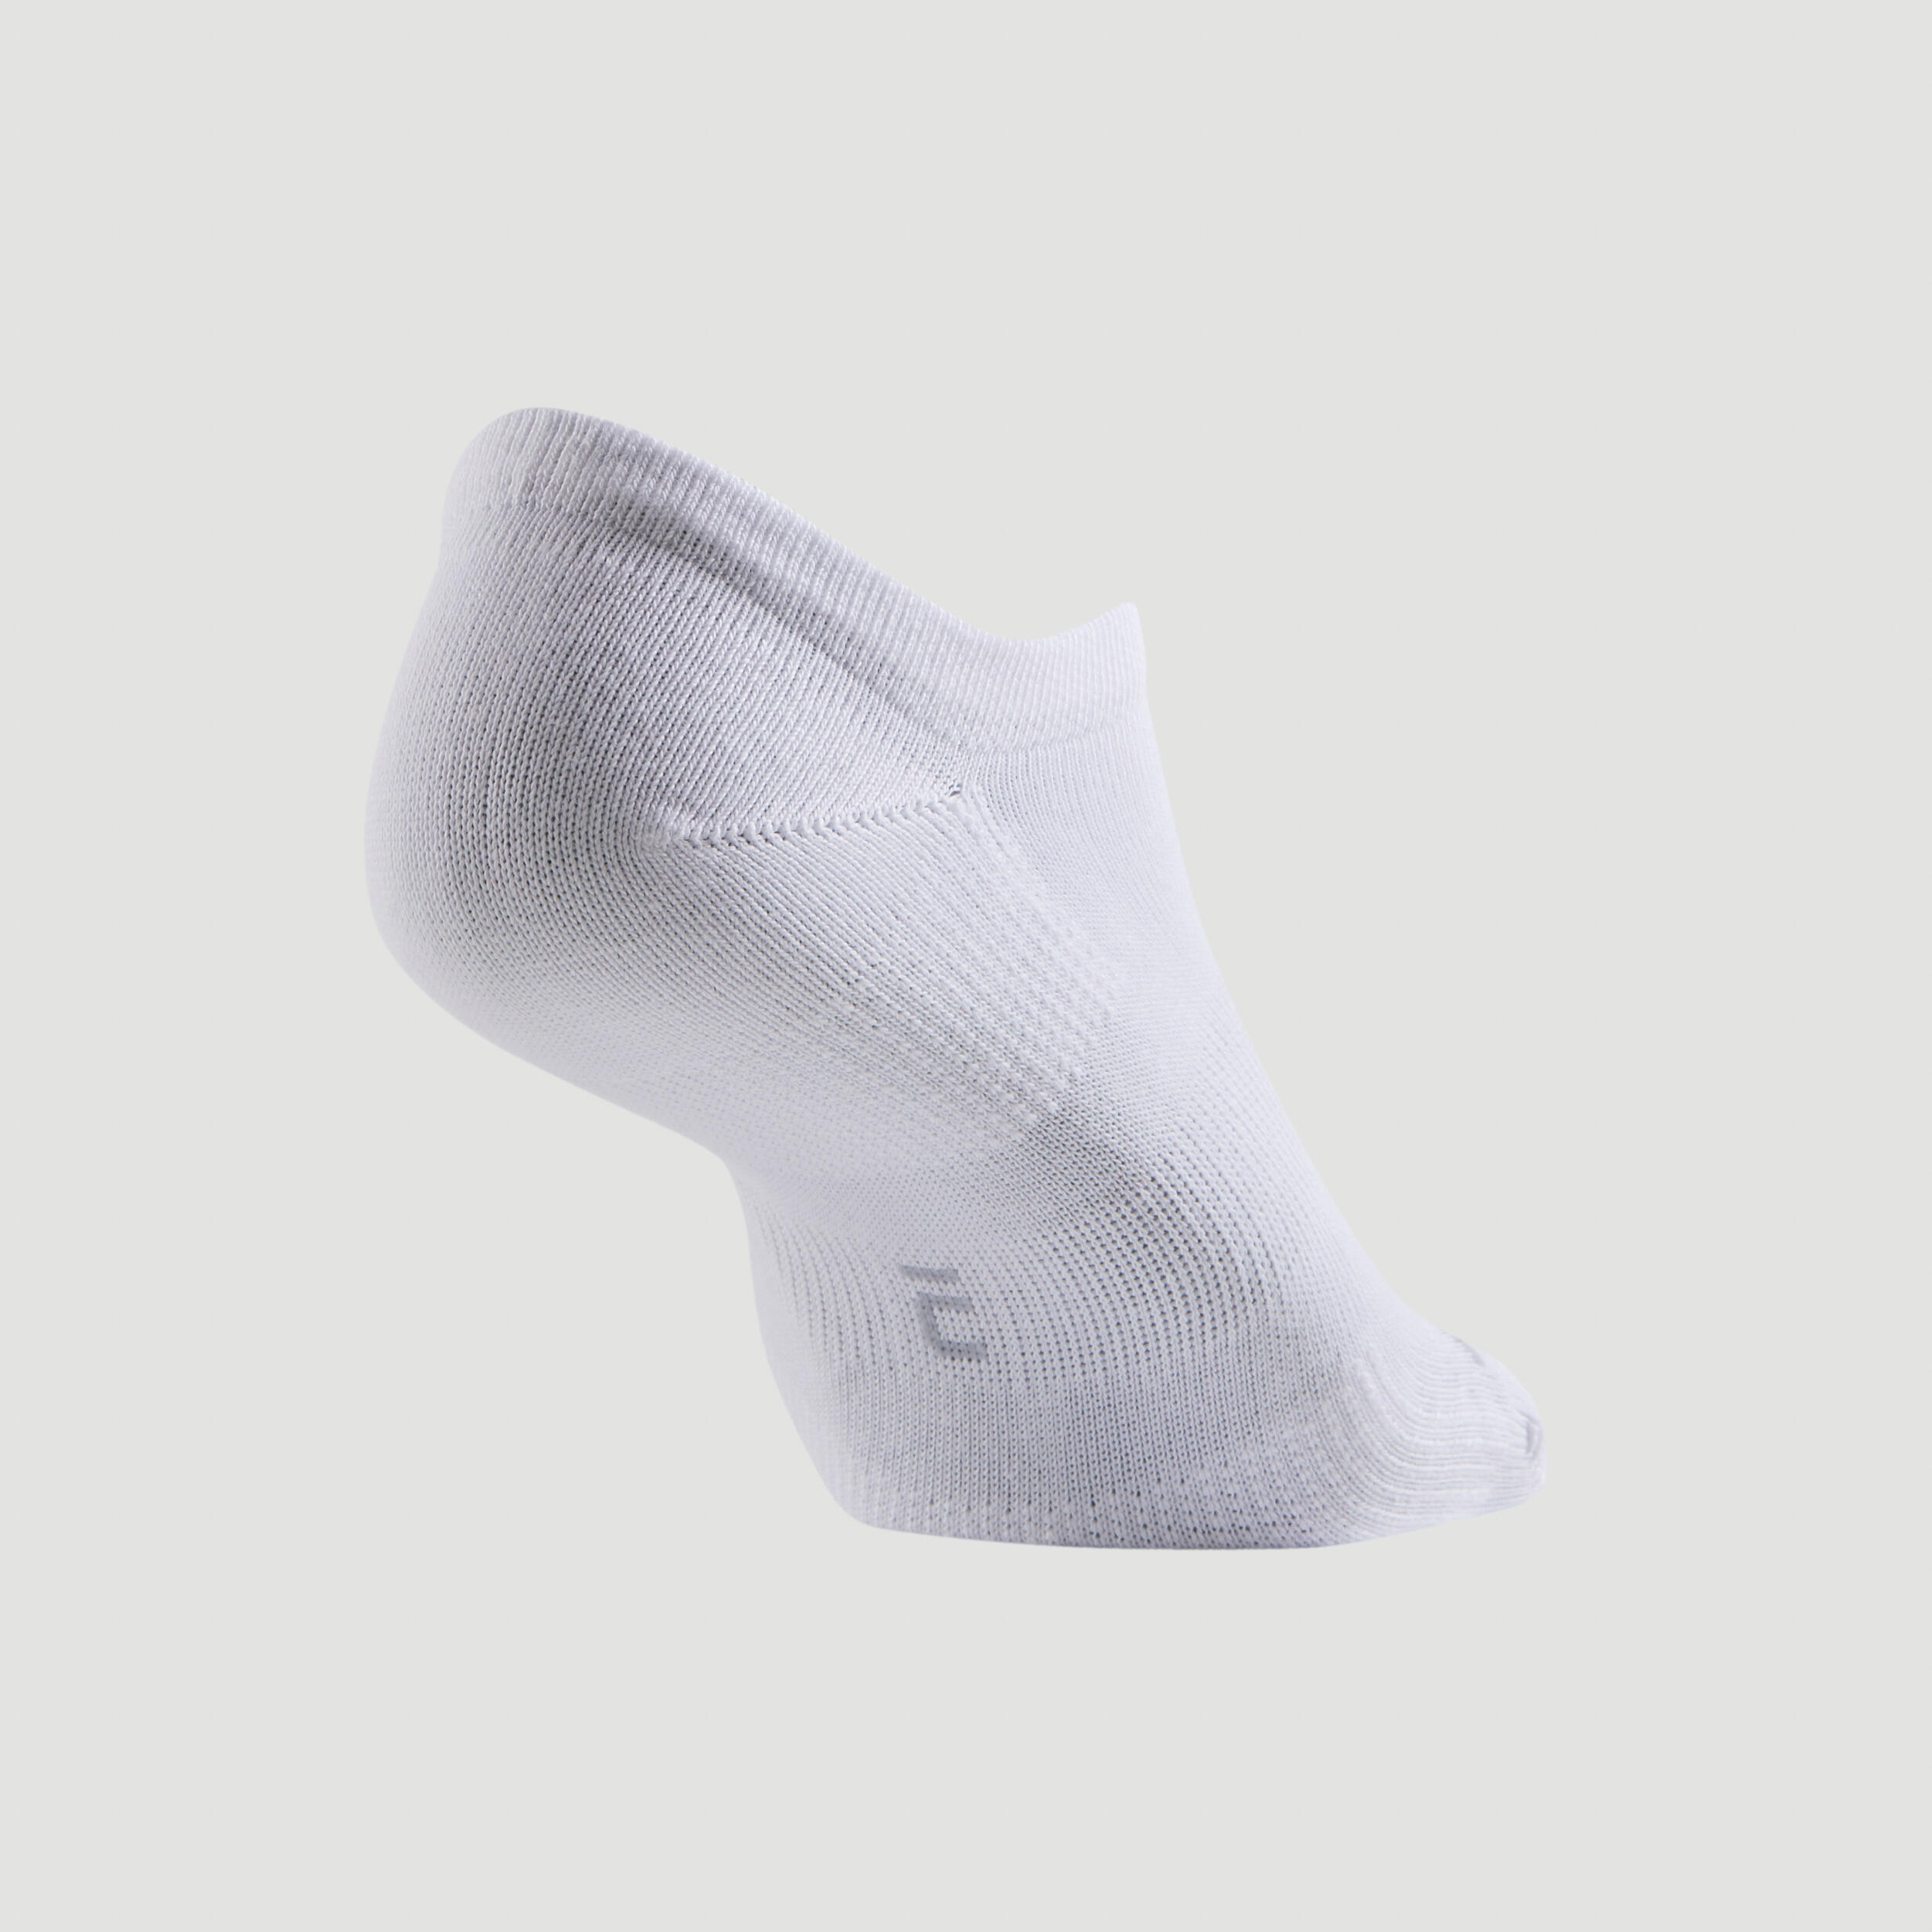 Low Sports Socks Tri-Pack RS 160 - White/Navy 6/10